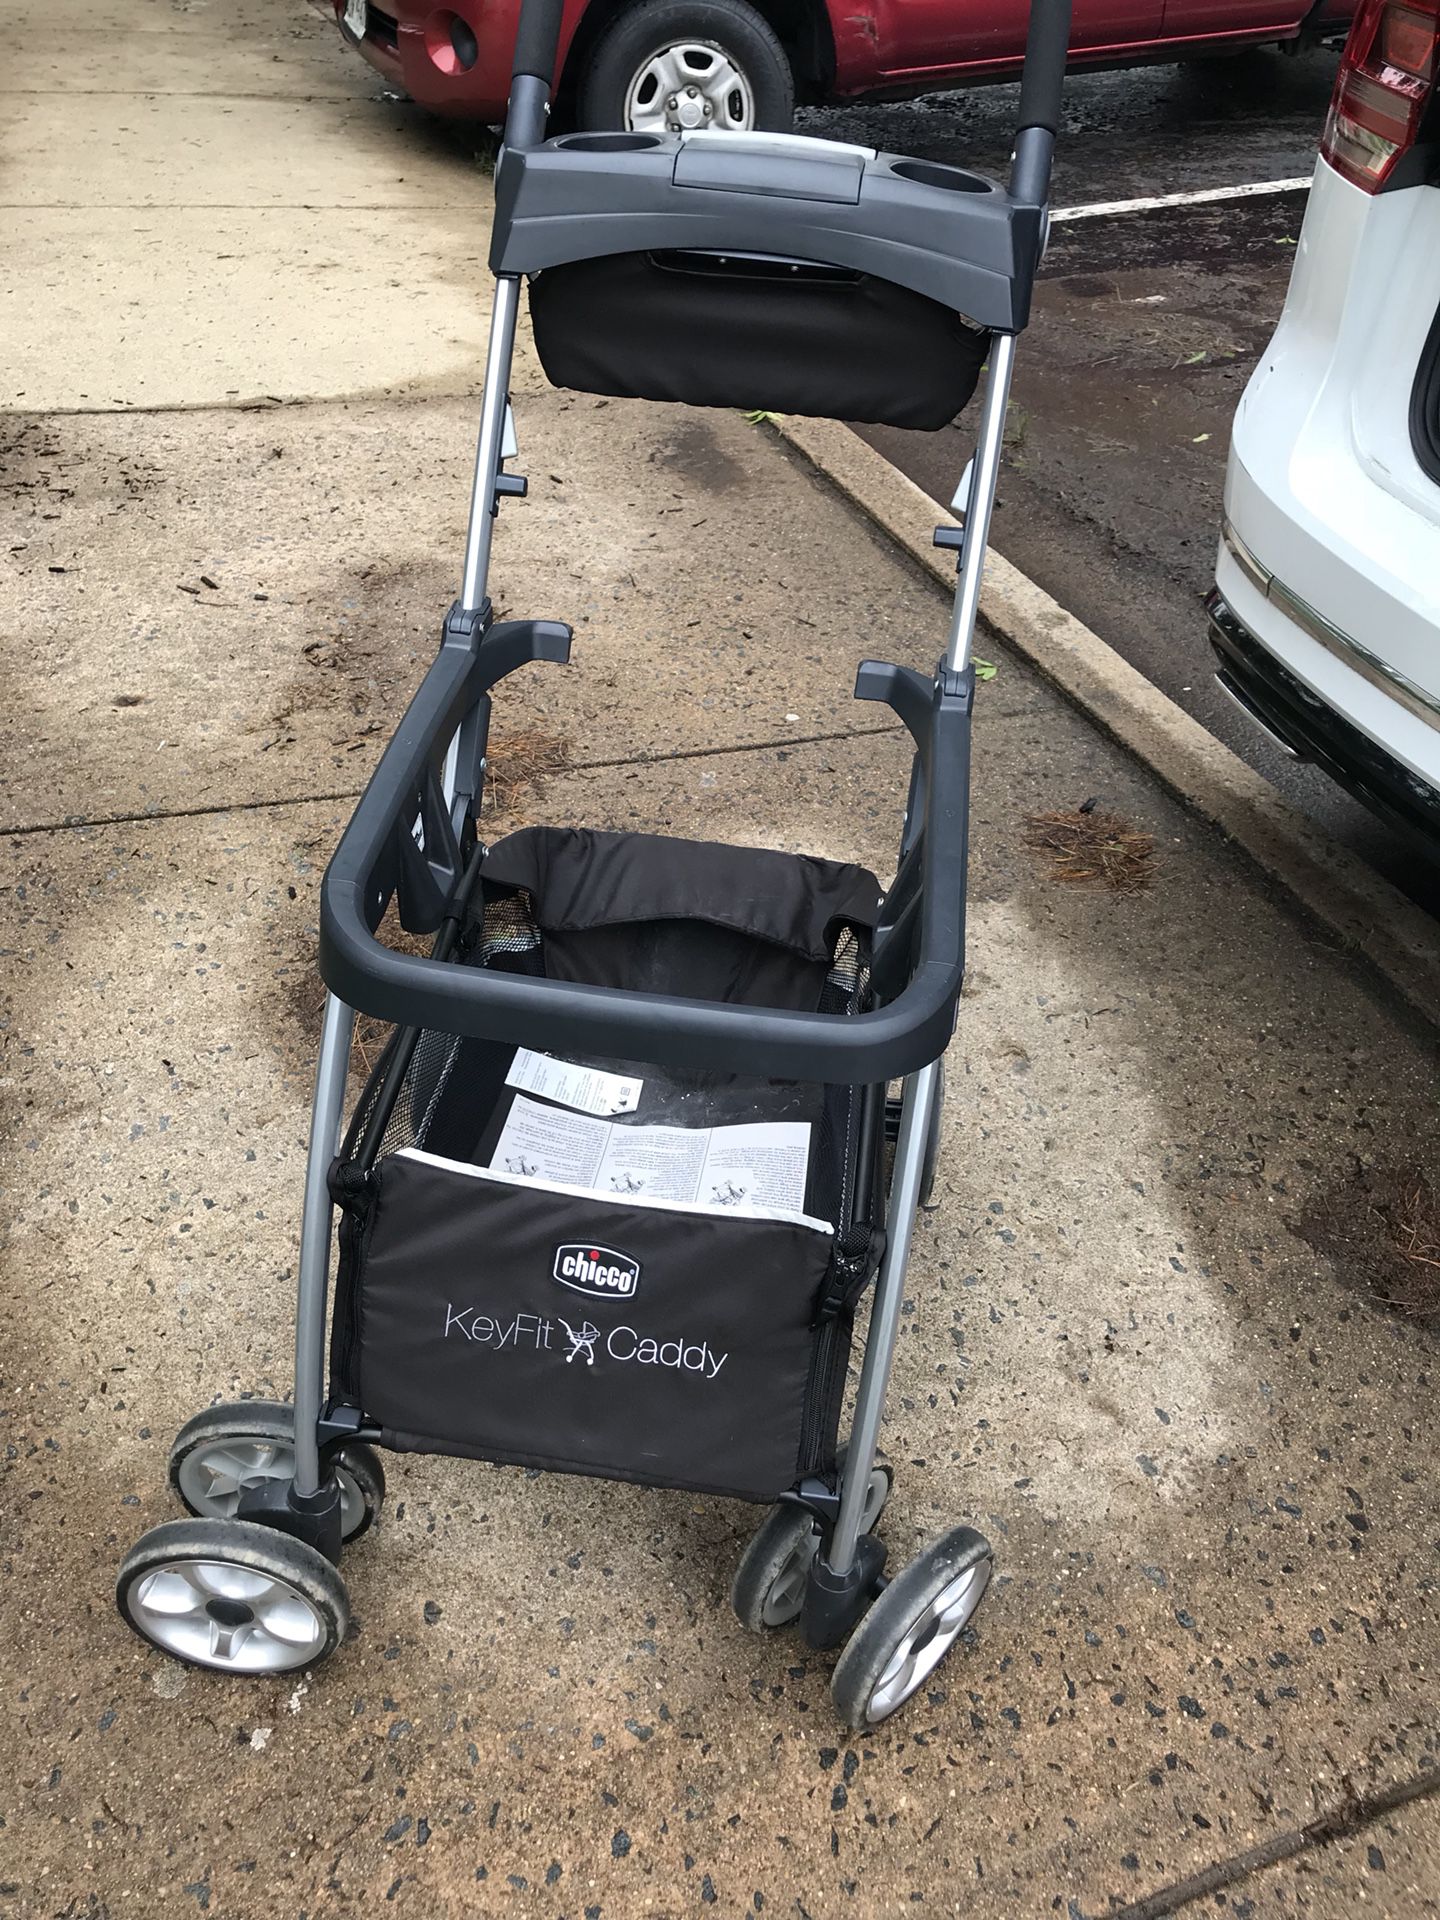 Chicco snap and go stroller